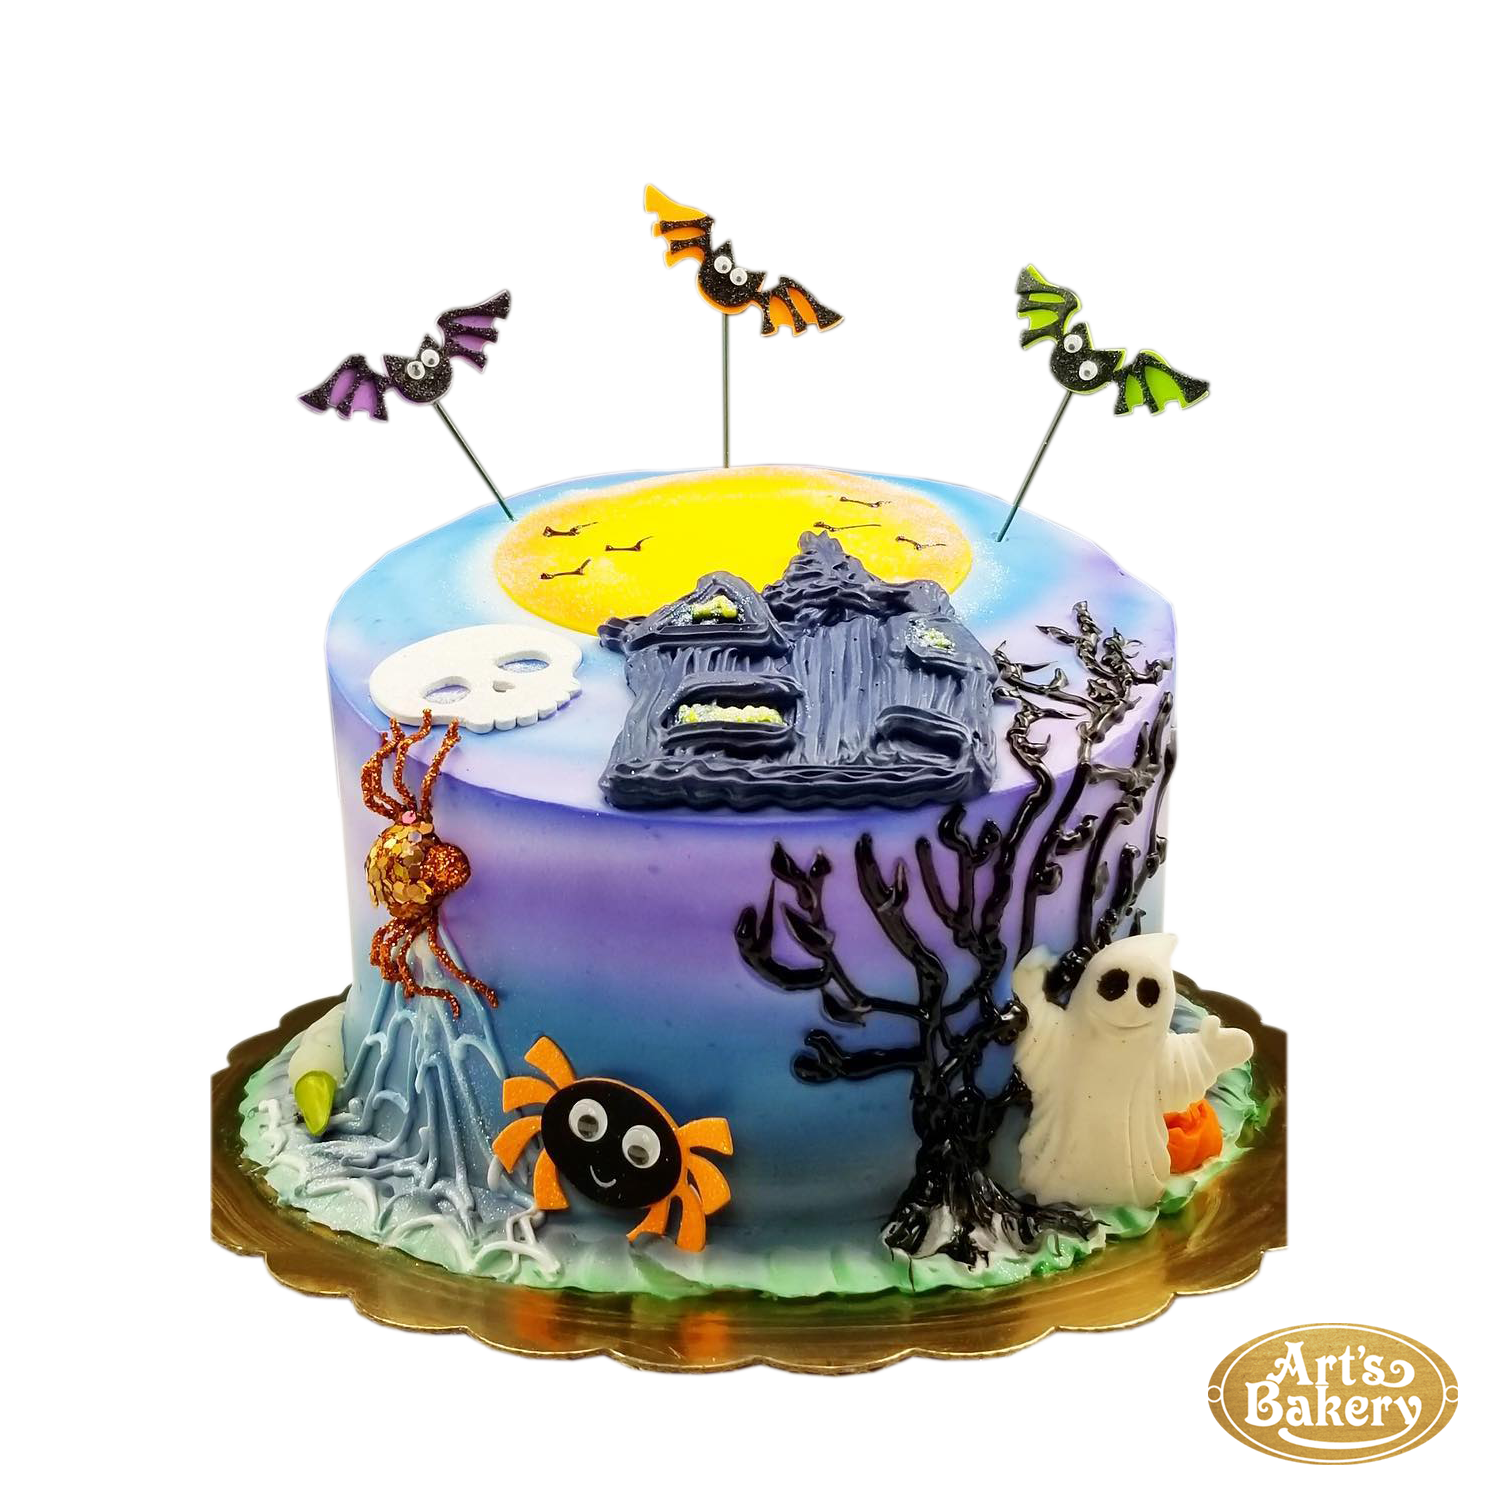 Is your child a fan of Gabby and the Magic House? Order a birthday cake  decorated with this TV series